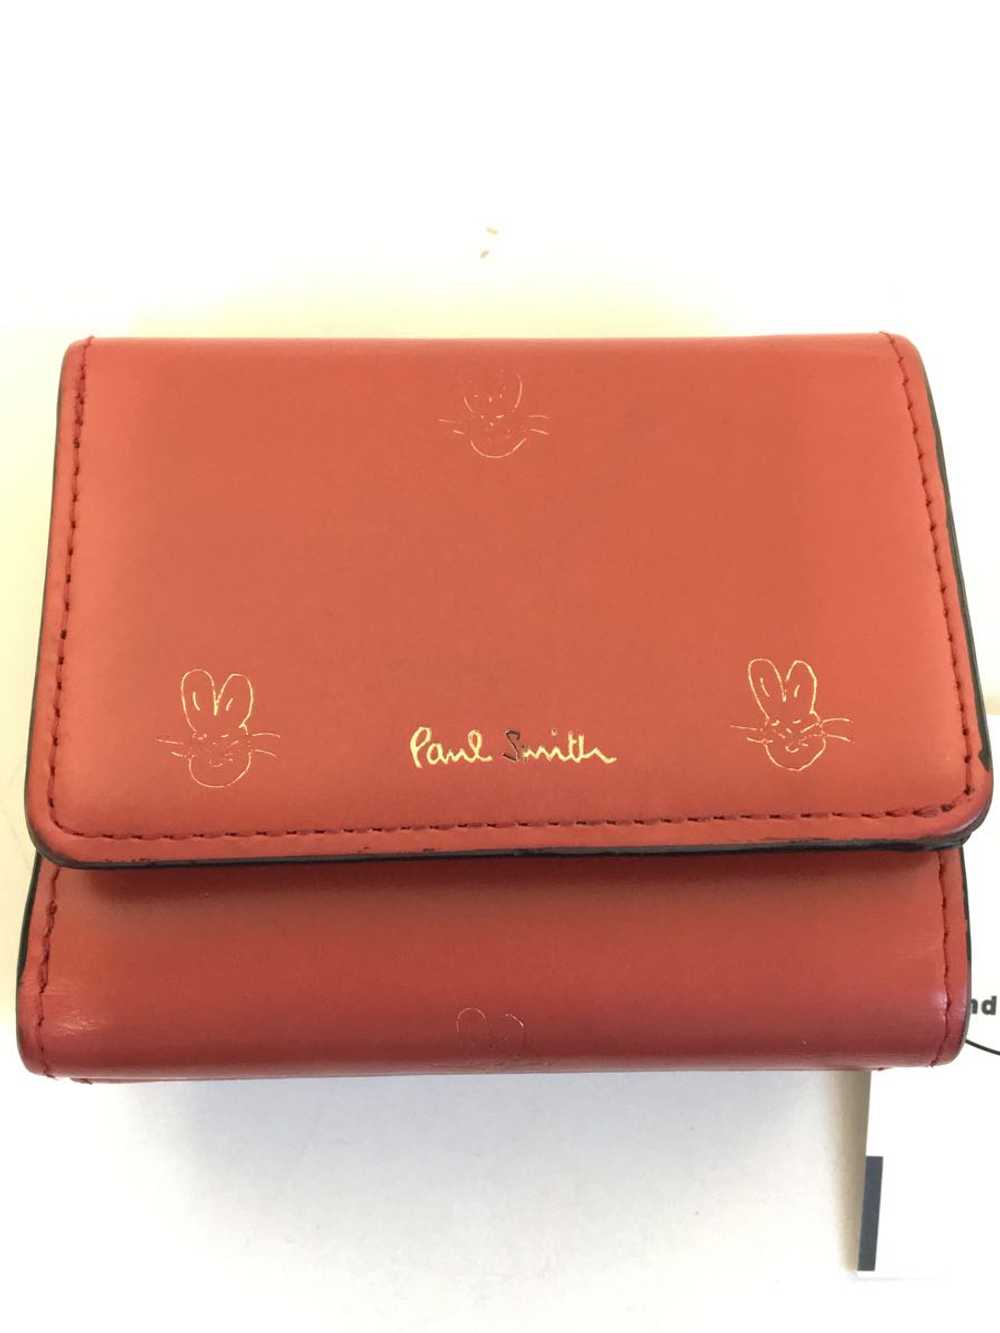 Paul Smith Trifold Wallet Red Animal Women - image 2